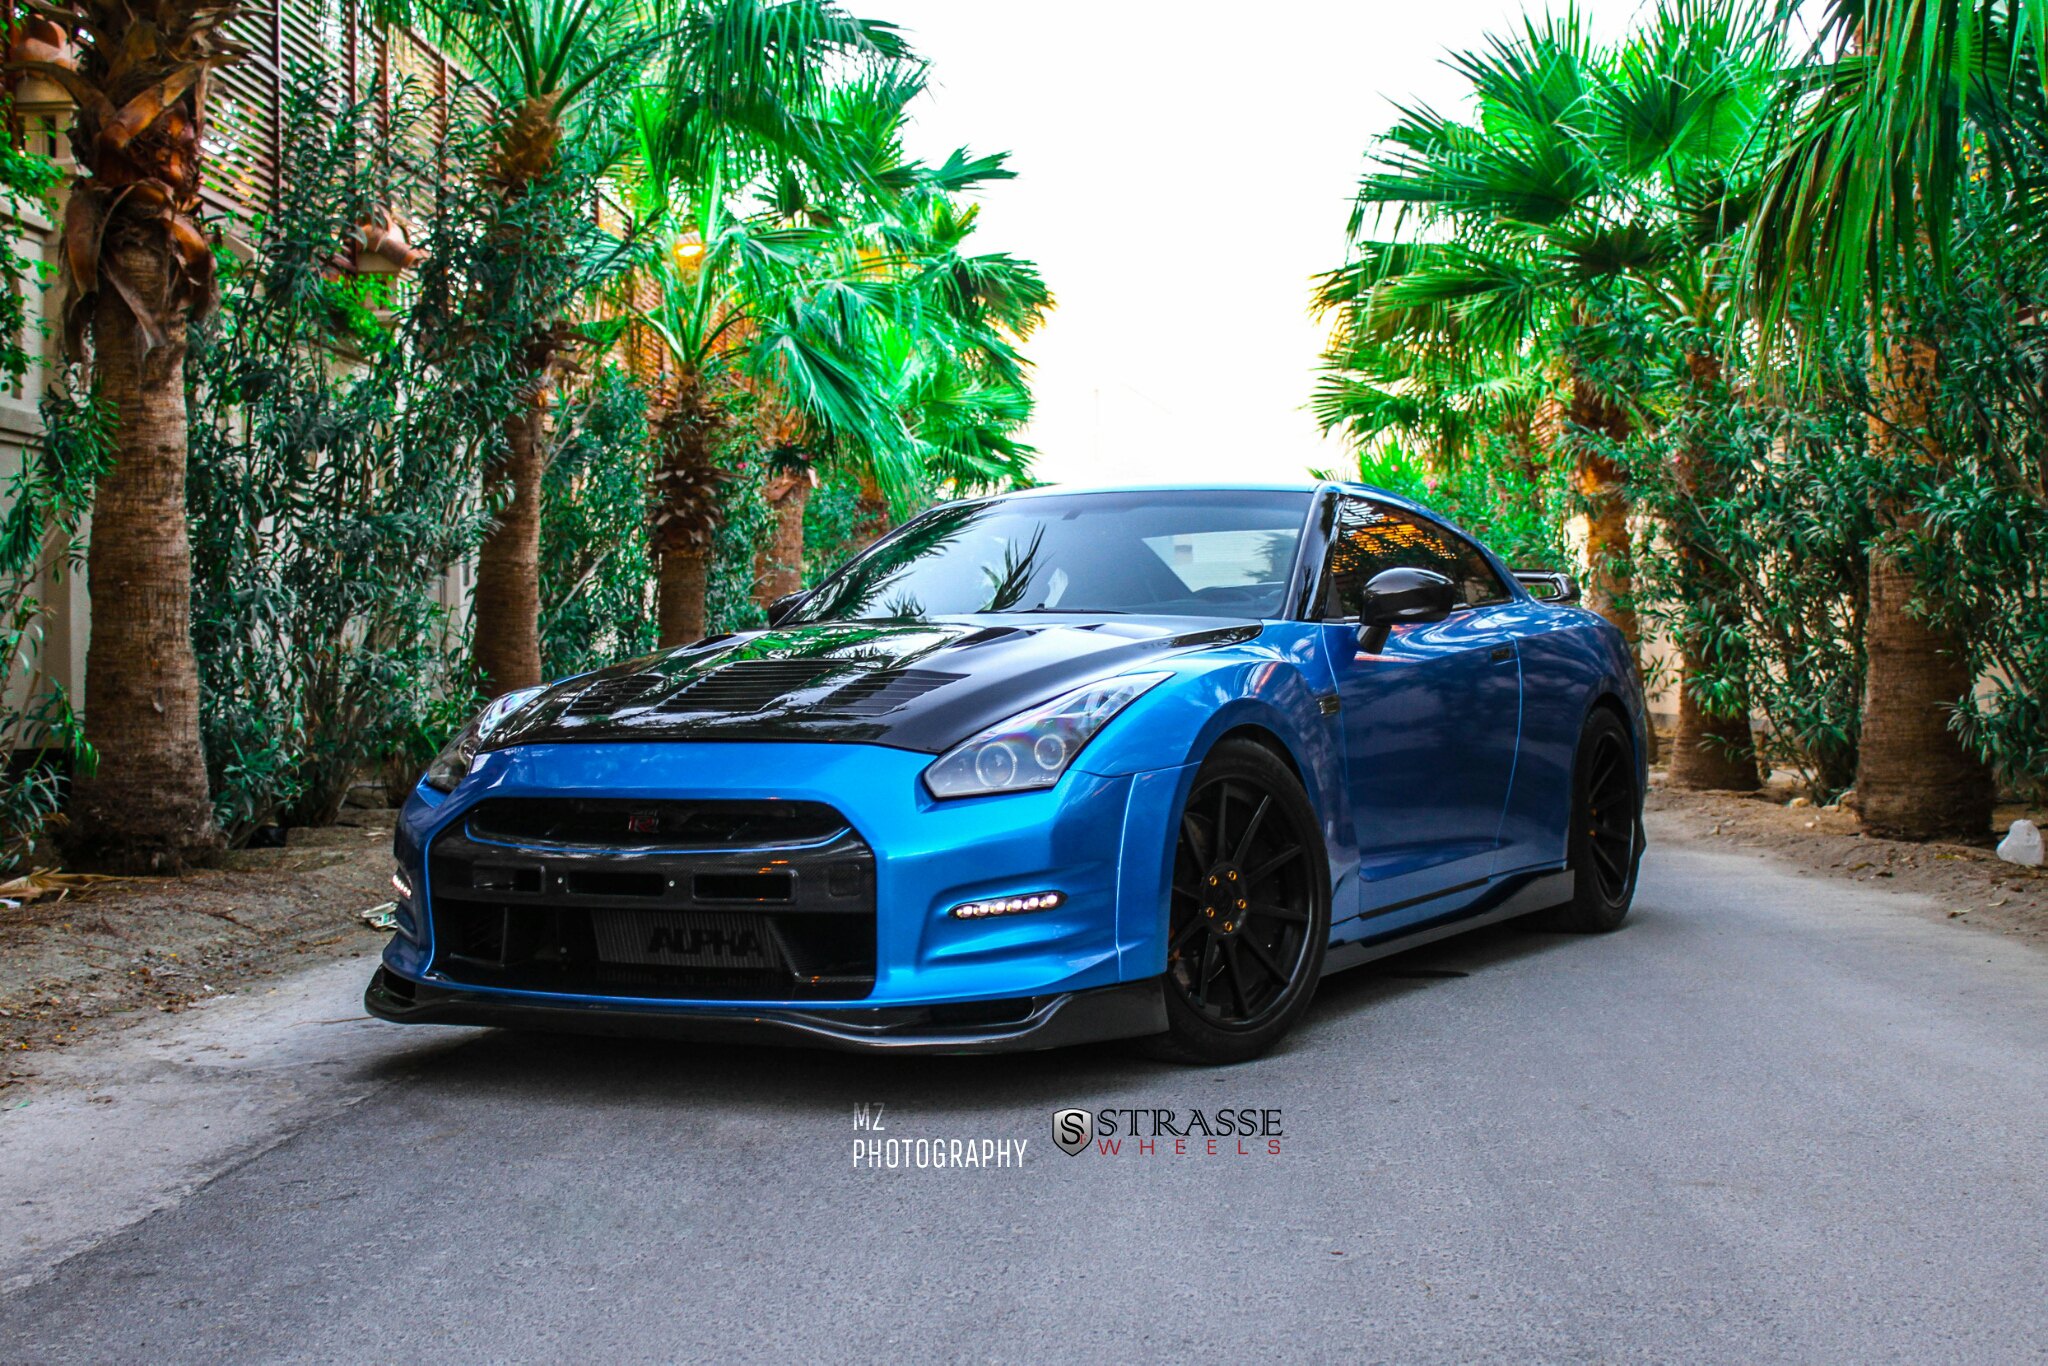 Custom Hood with Air Vents on Blue Nissan GT-R - Photo by Strasse Forged